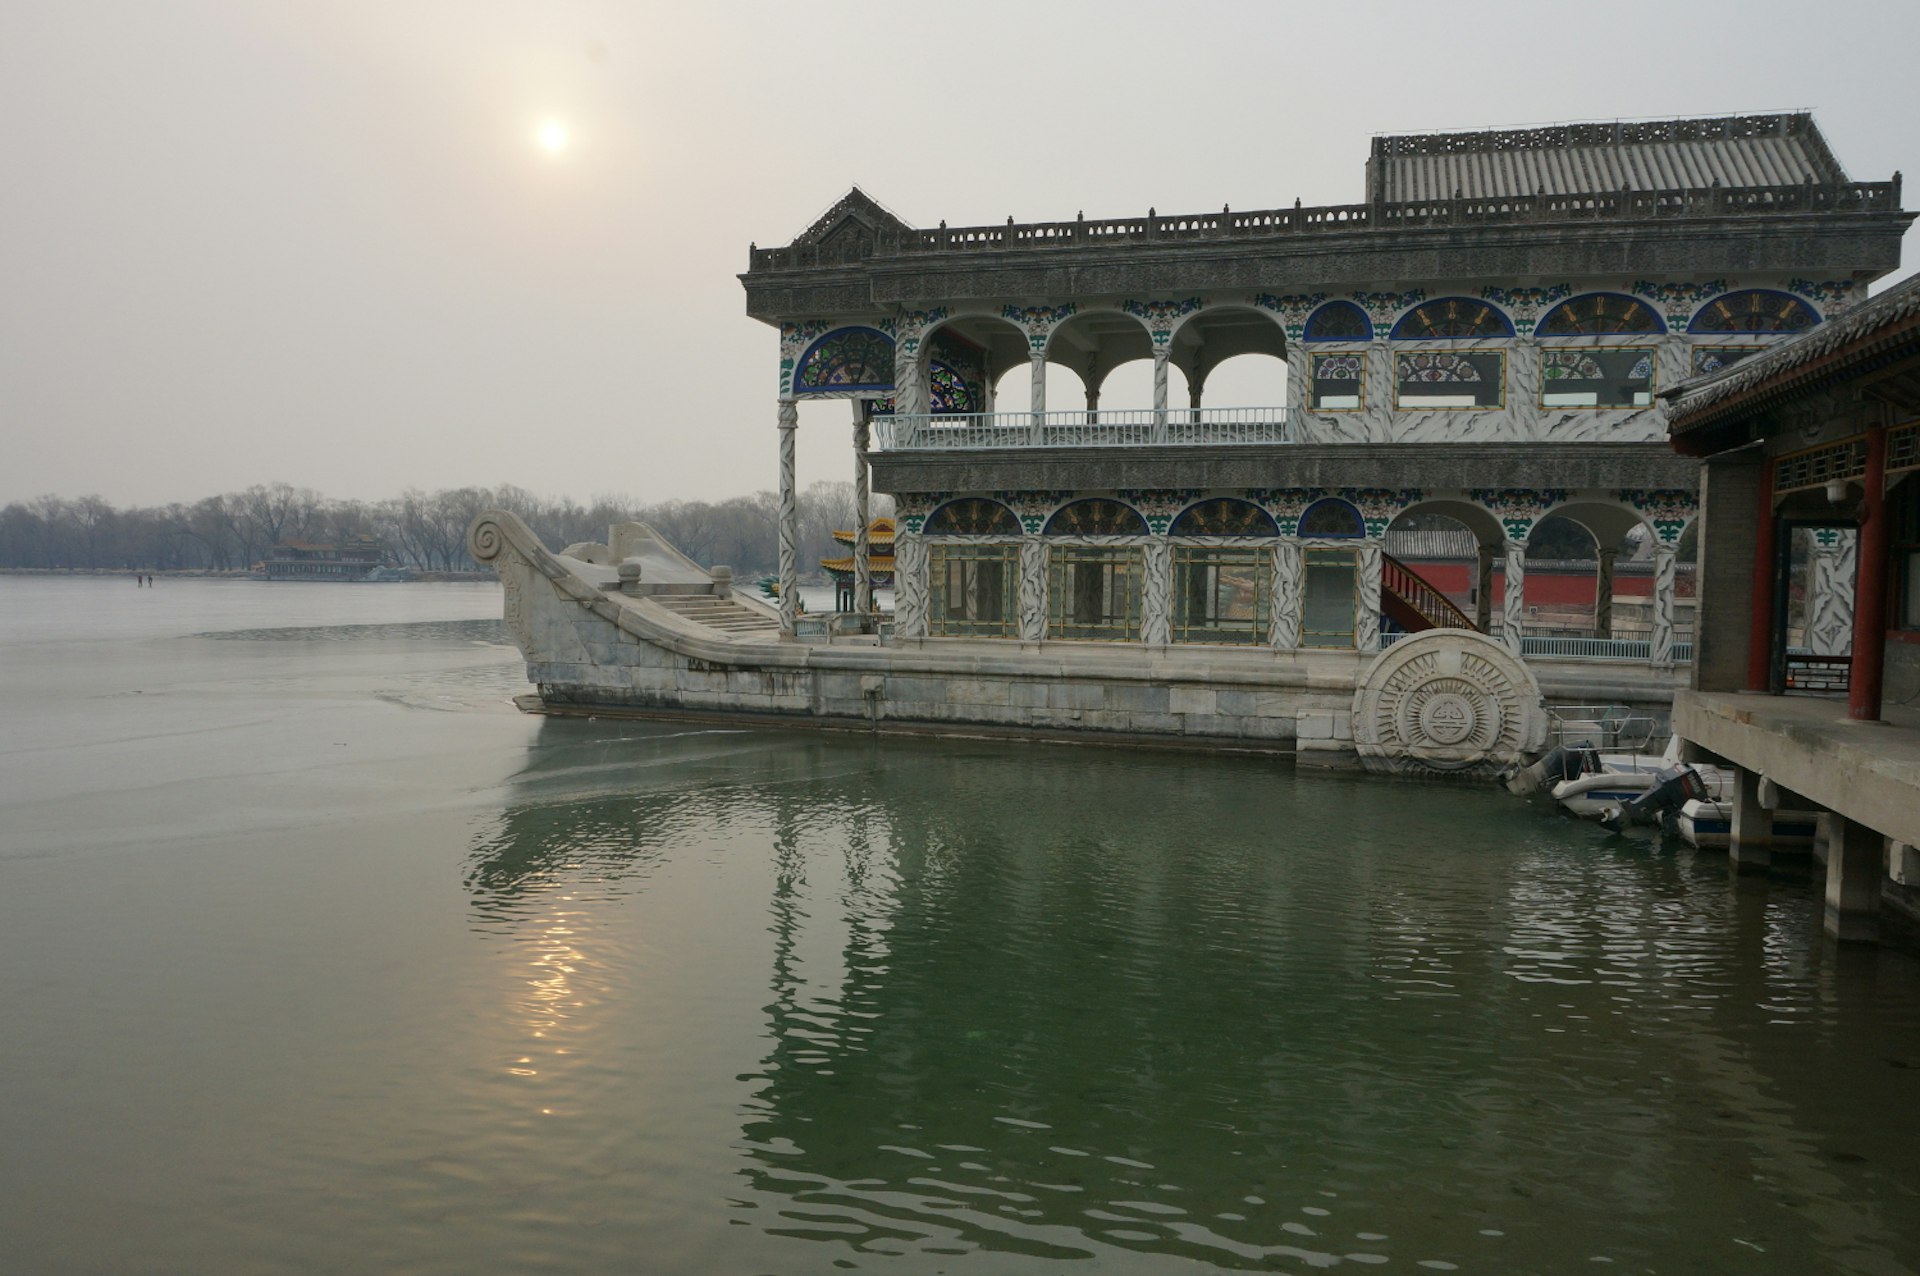 A smoggy day at the Summer Palace. Image by Anita Isalska / Lonely Planet